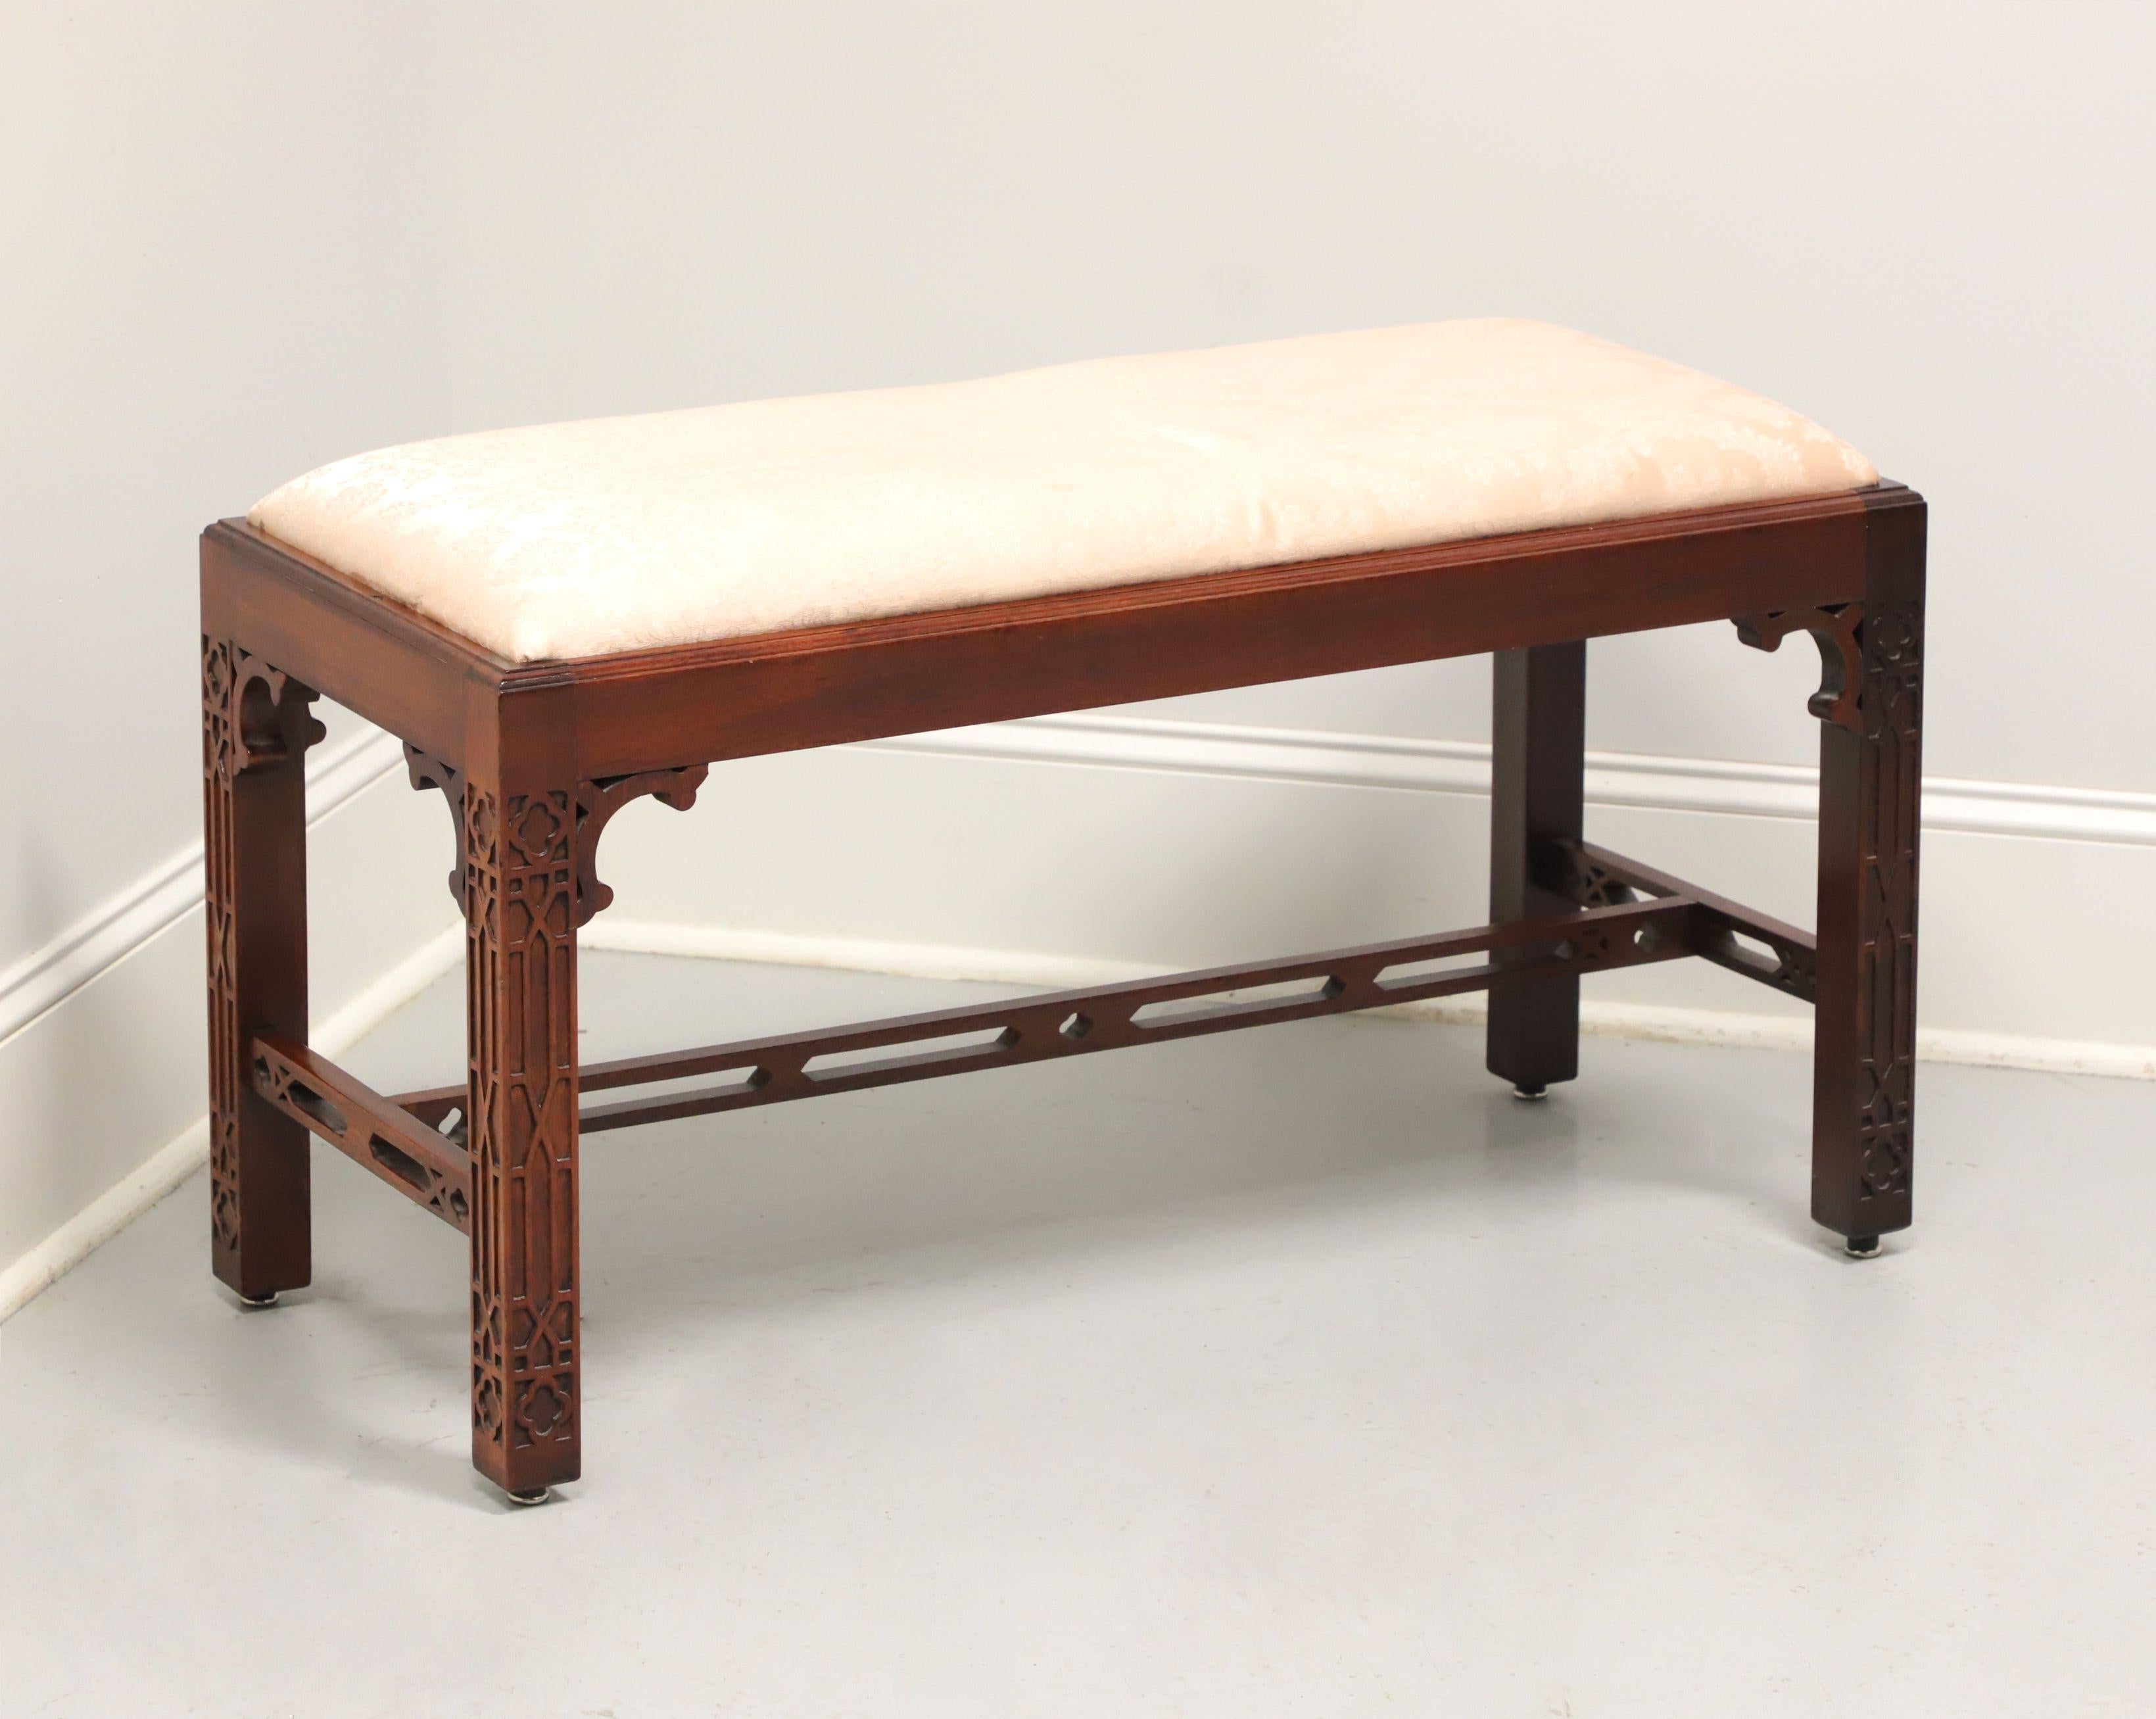 BAKER Cliveden Place Mahogany Chippendale Style Fretwork Bench 1